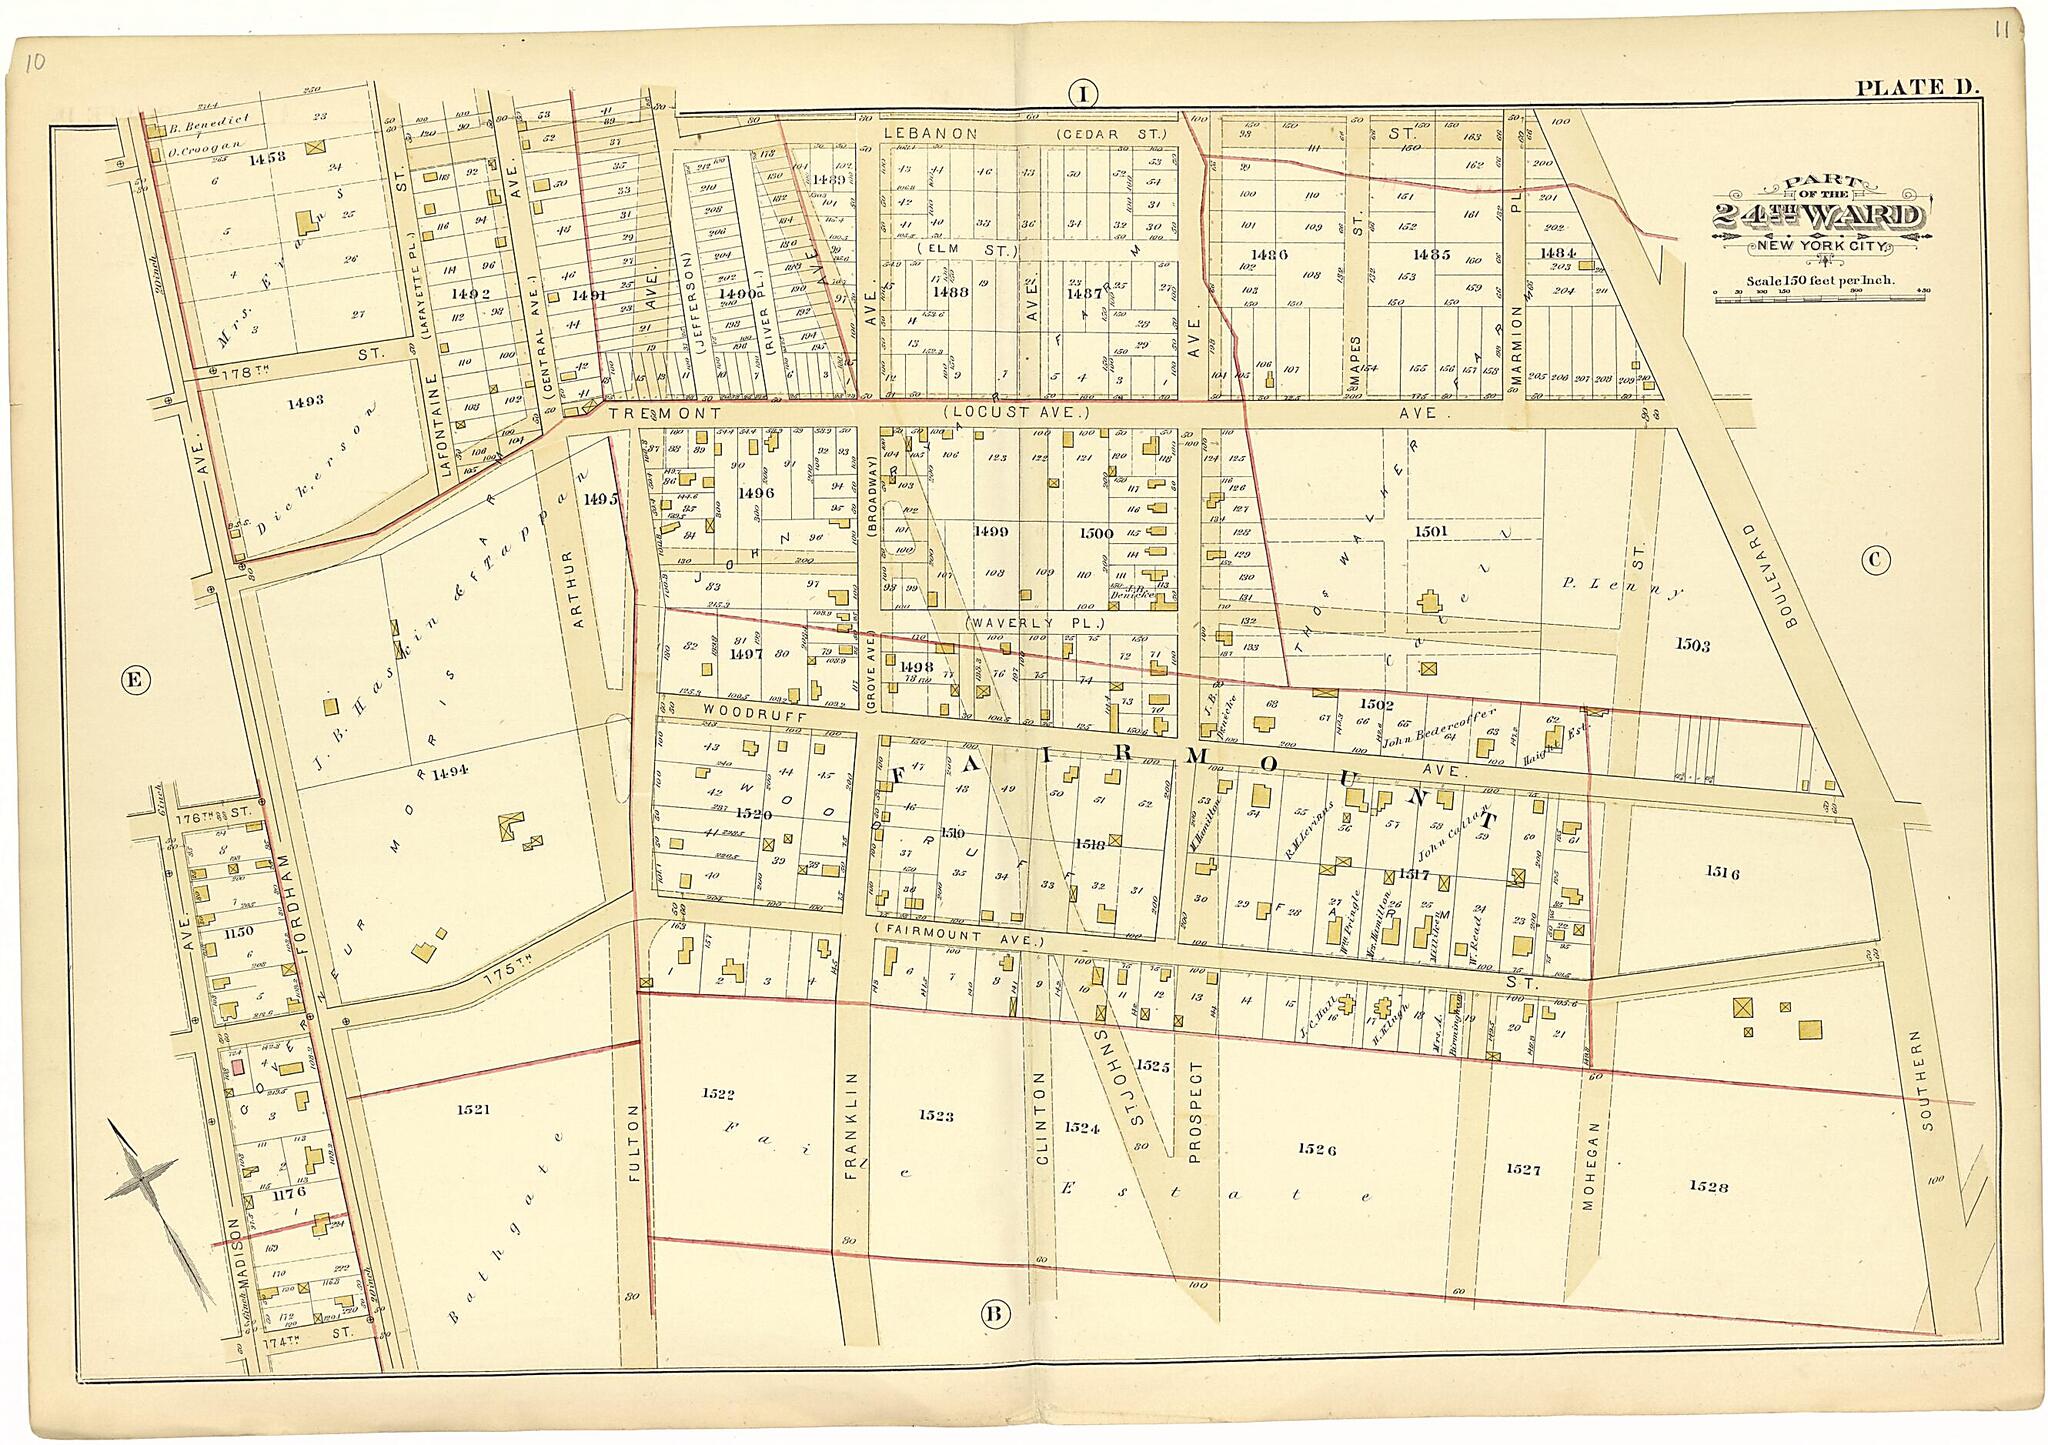 This old map of Part of the 24th Ward New York City - Plate D from Atlas of the Twenty Fourth Ward, New York City from 1882 was created by A. H. (August H.) Mueller in 1882